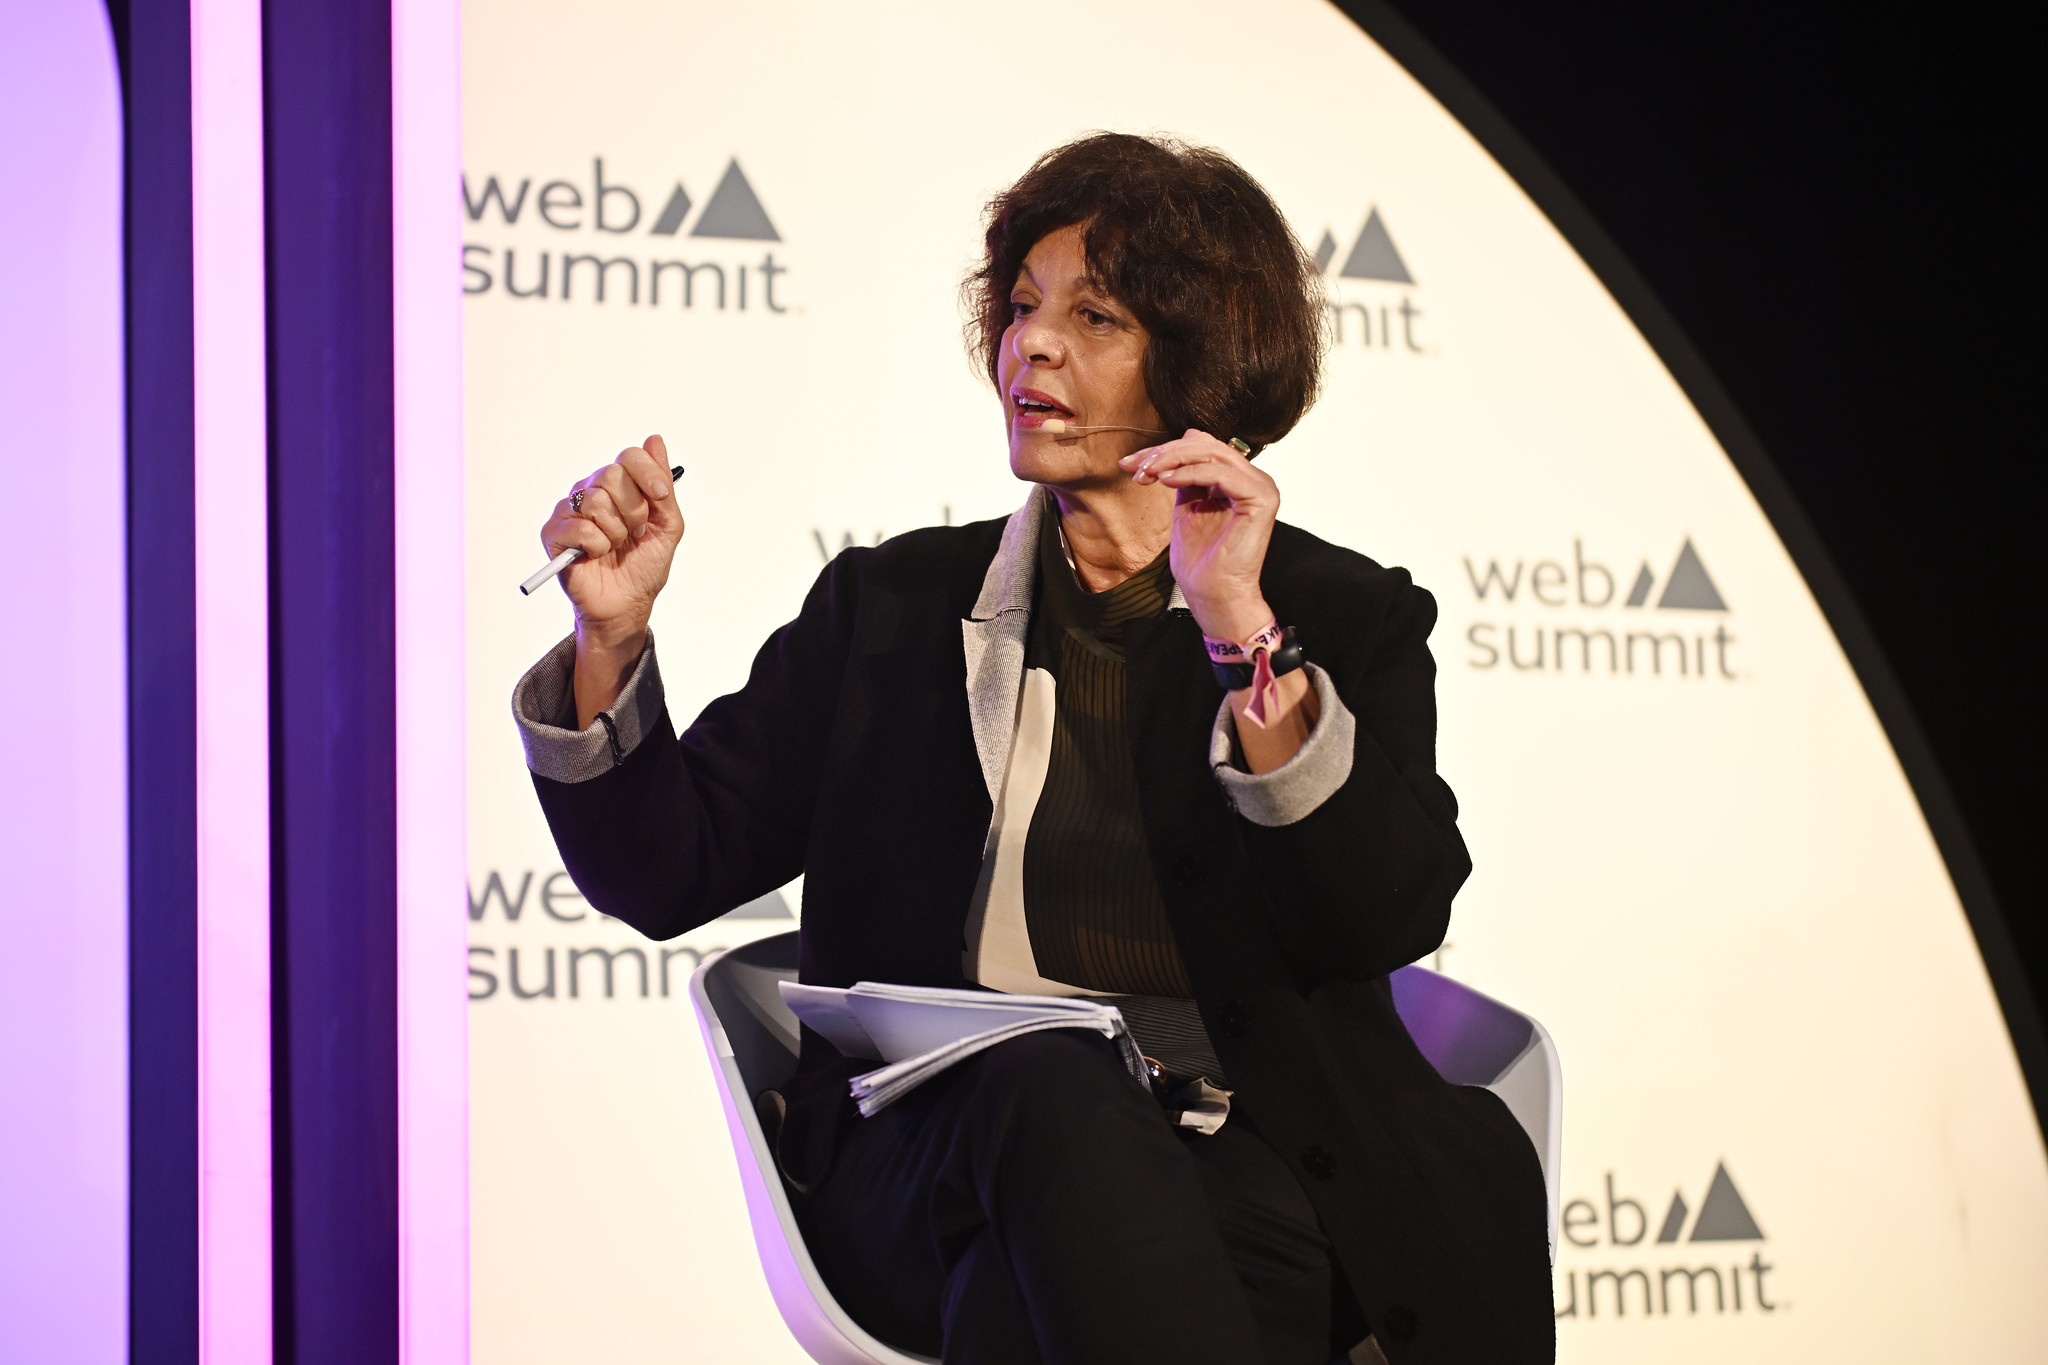 Luisa Meireles, Editor-in-chief, Agência Lusa, on Fourth Estate Stage during day one of Web Summit 2023 at the Altice Arena in Lisbon, Portugal.